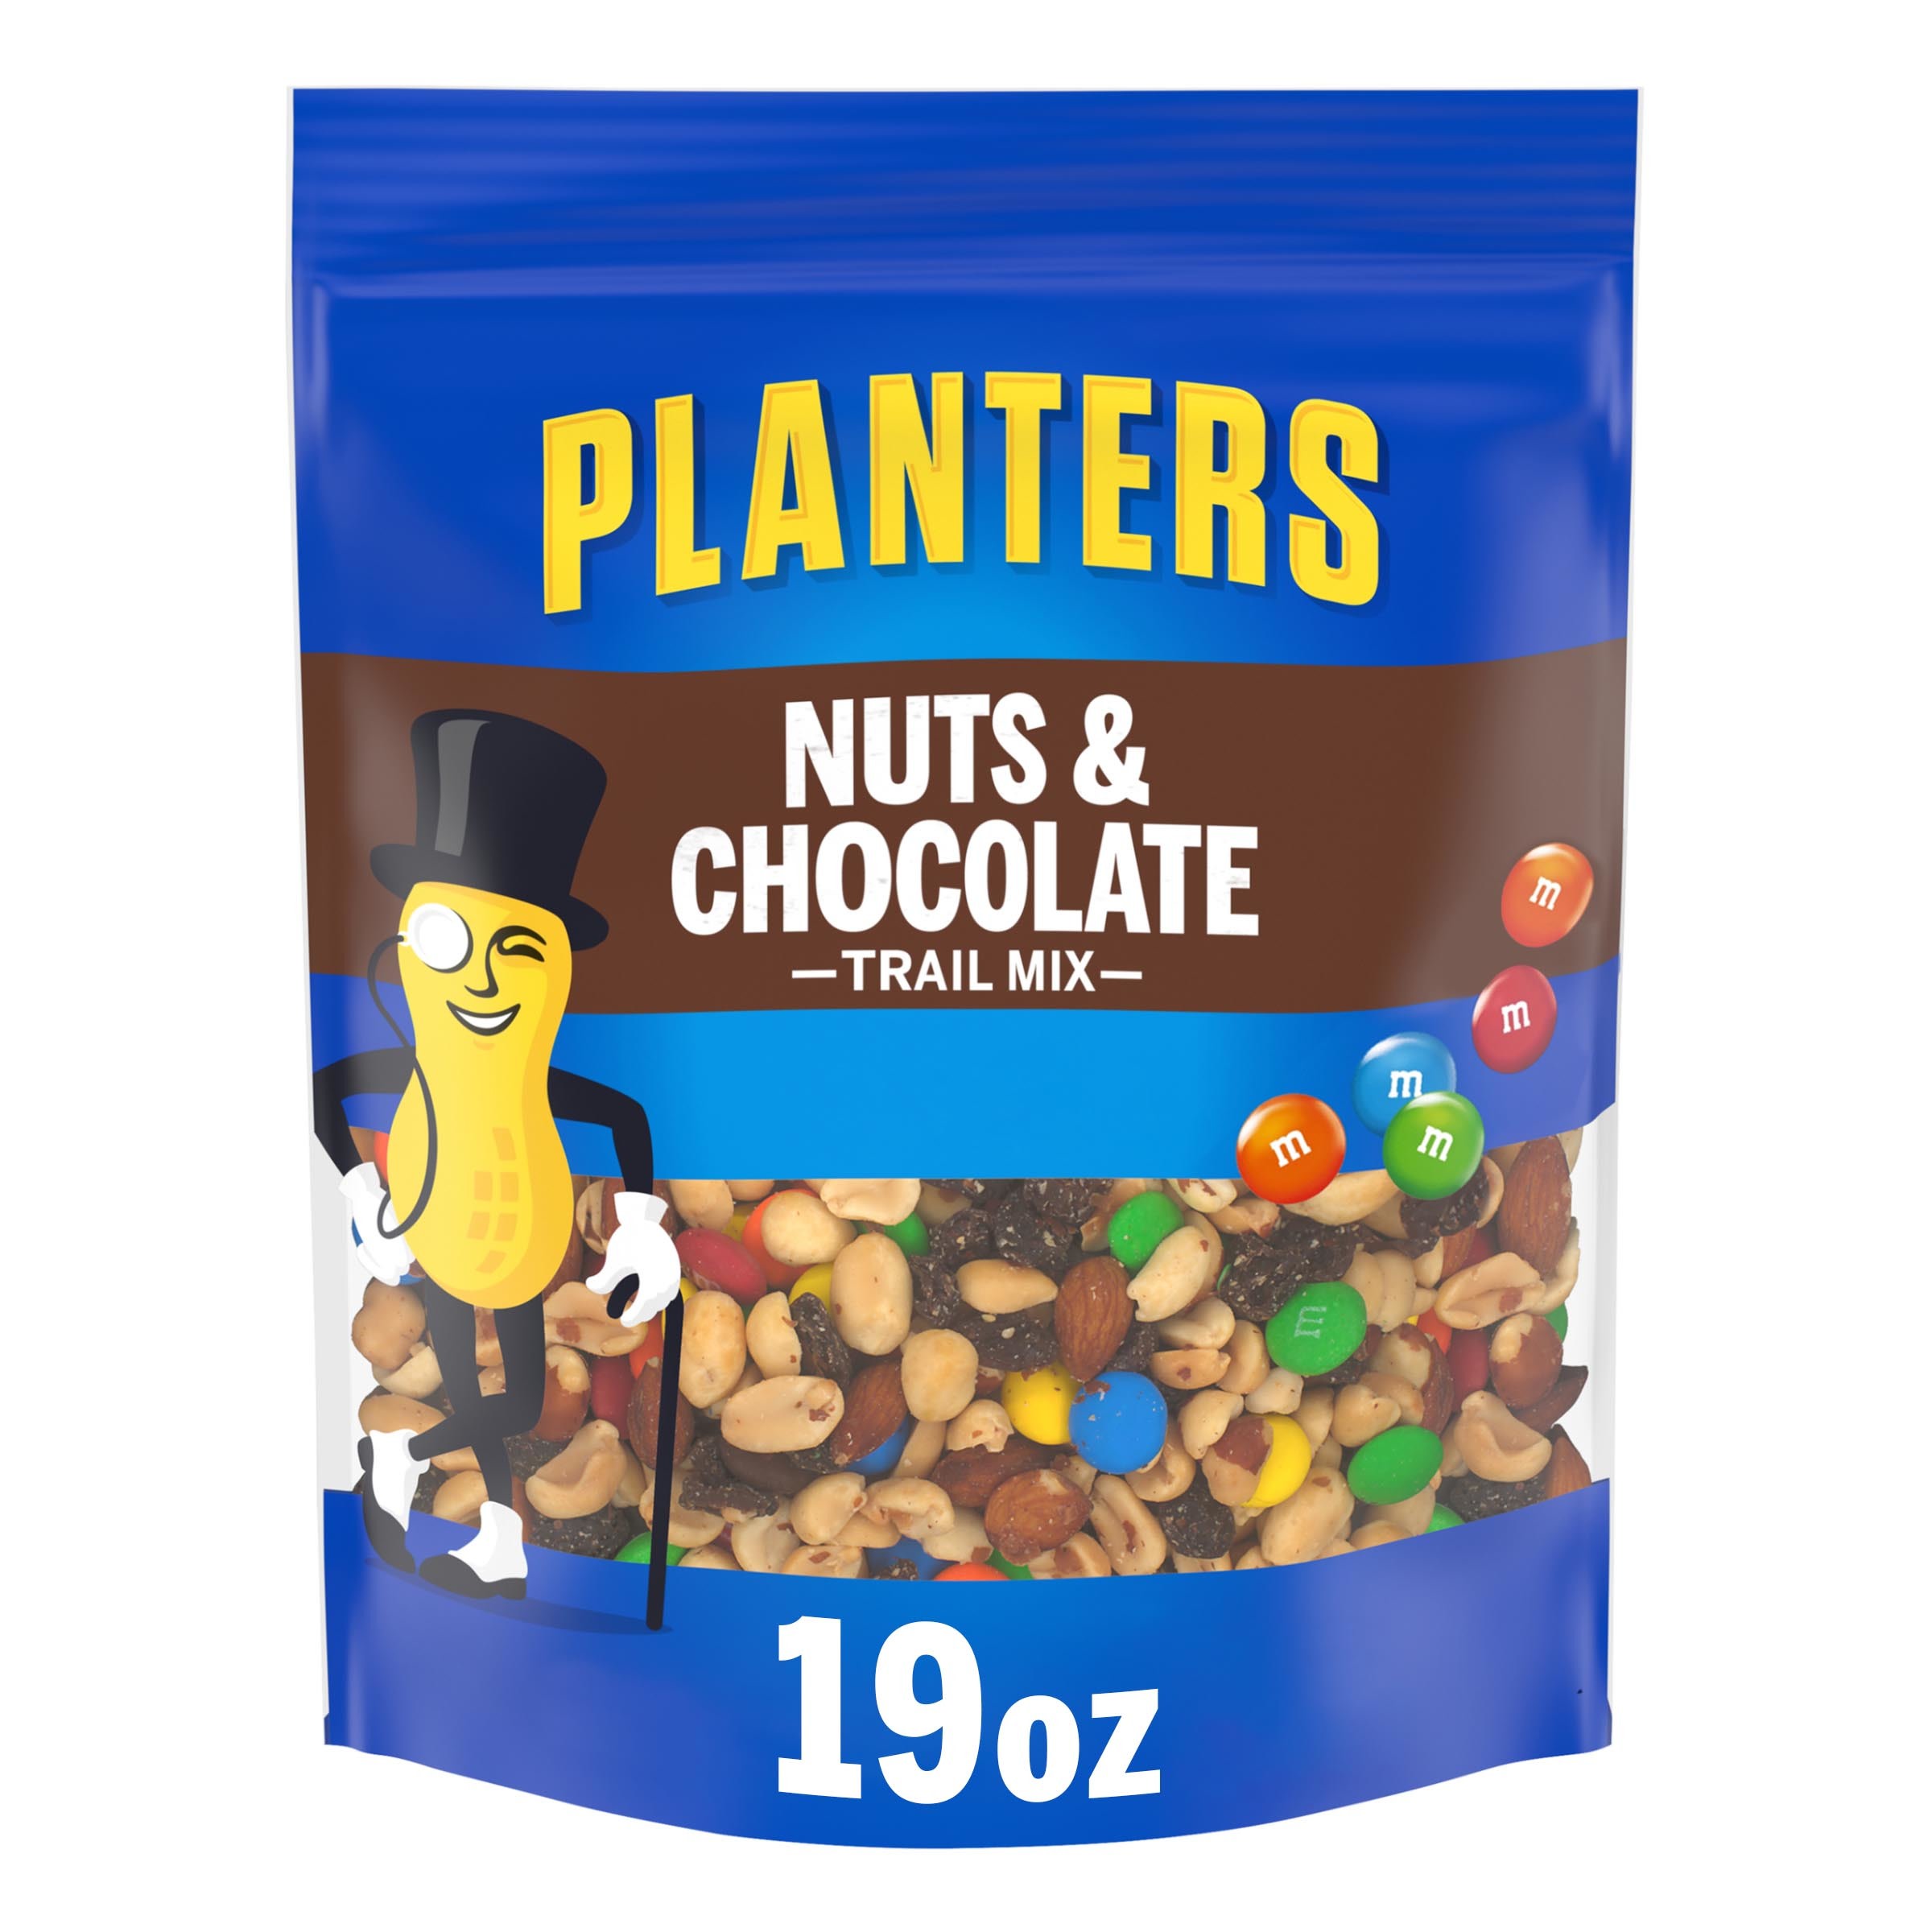 Planters Nuts & Chocolate Trail Mix with Roasted Peanuts, M&M Chocolate Candies, Raisins & Roasted Almonds, 1.19 lb Bag - image 1 of 14